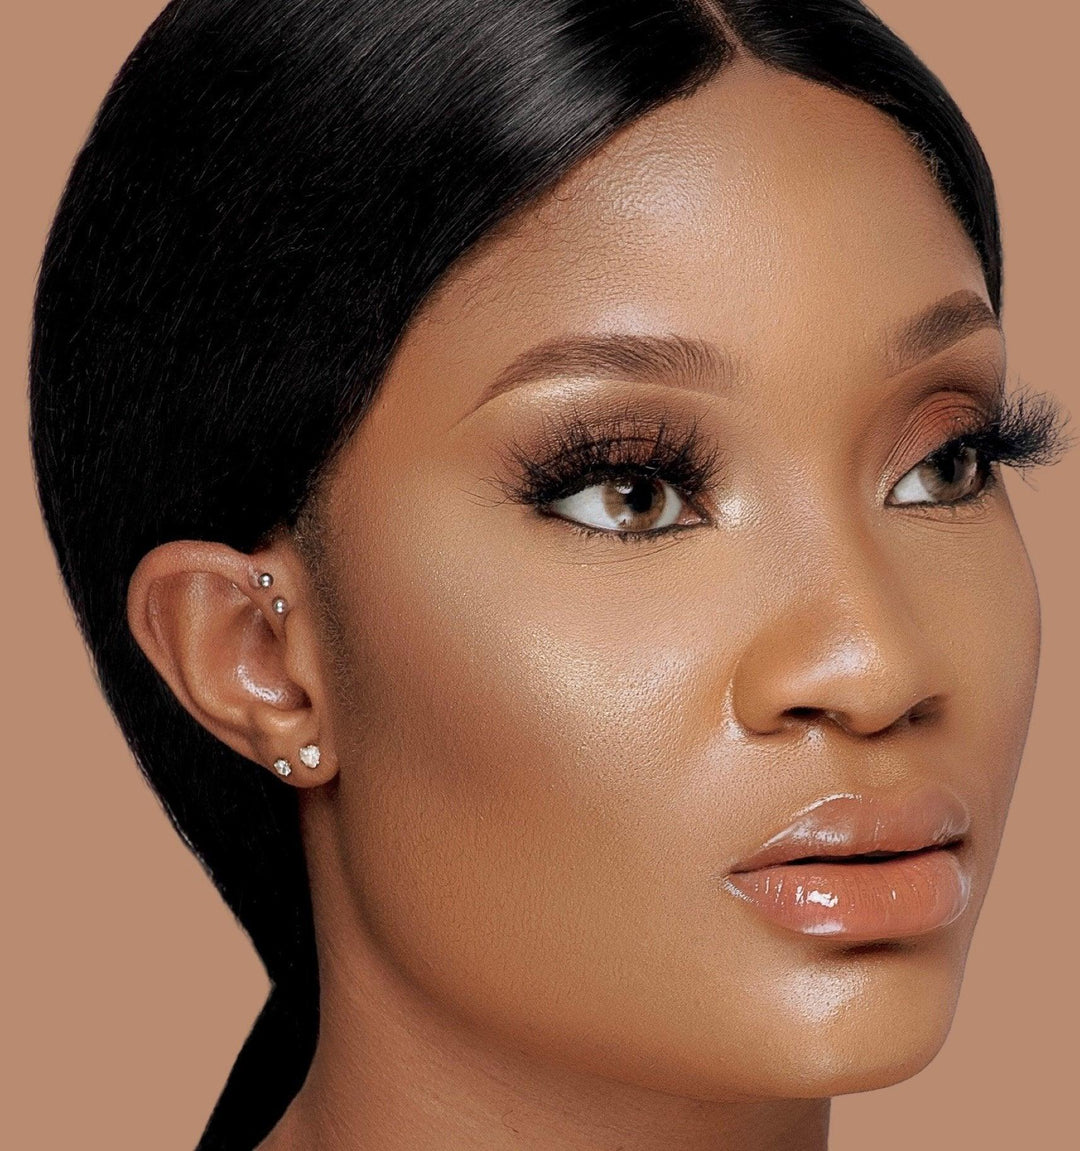 Mink Eye Lashes (#17) in Lagos, Nigeria - All Things Chic